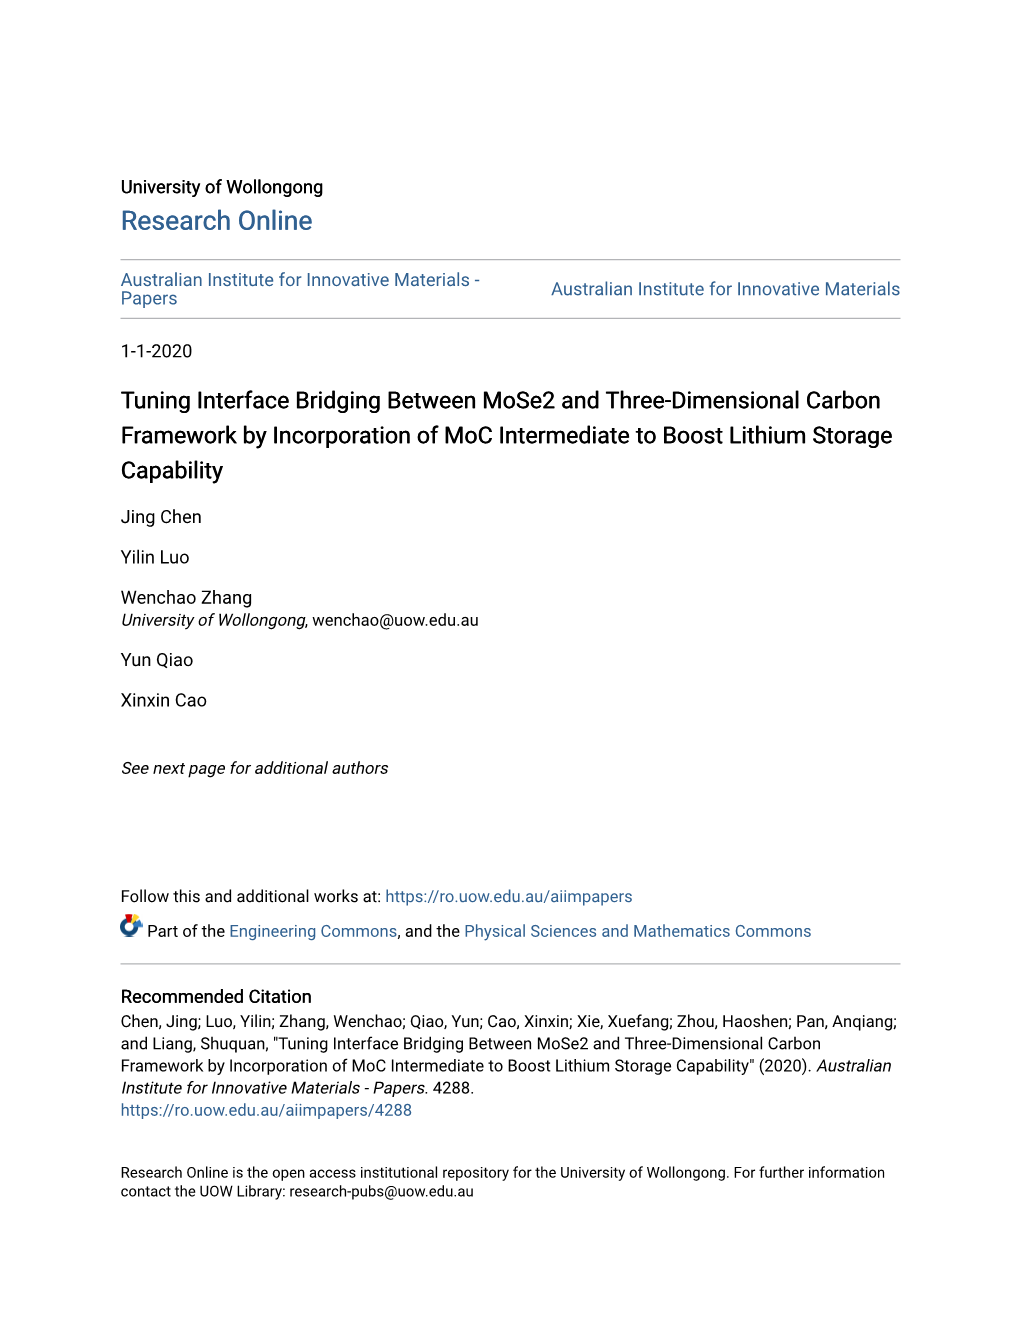 Tuning Interface Bridging Between Mose2 and Three-Dimensional Carbon Framework by Incorporation of Moc Intermediate to Boost Lithium Storage Capability